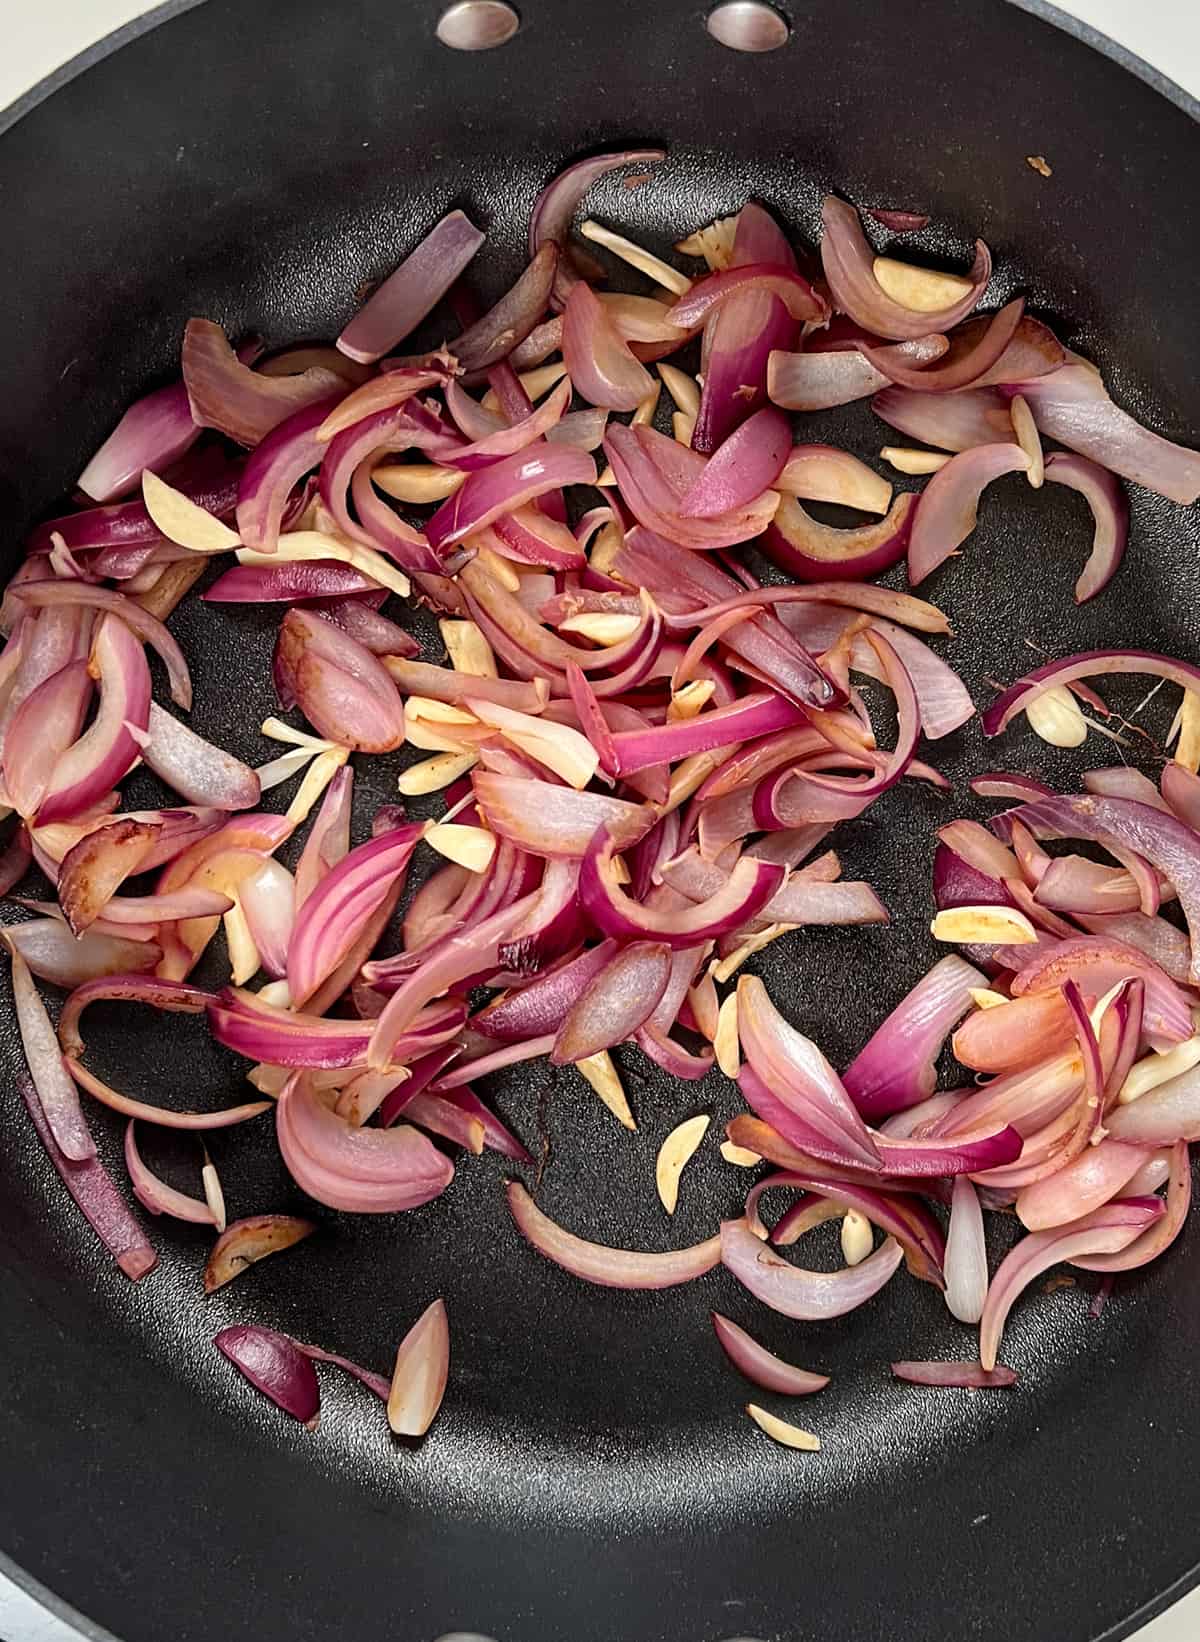 softened red onion slices and garlic slices in a black pan